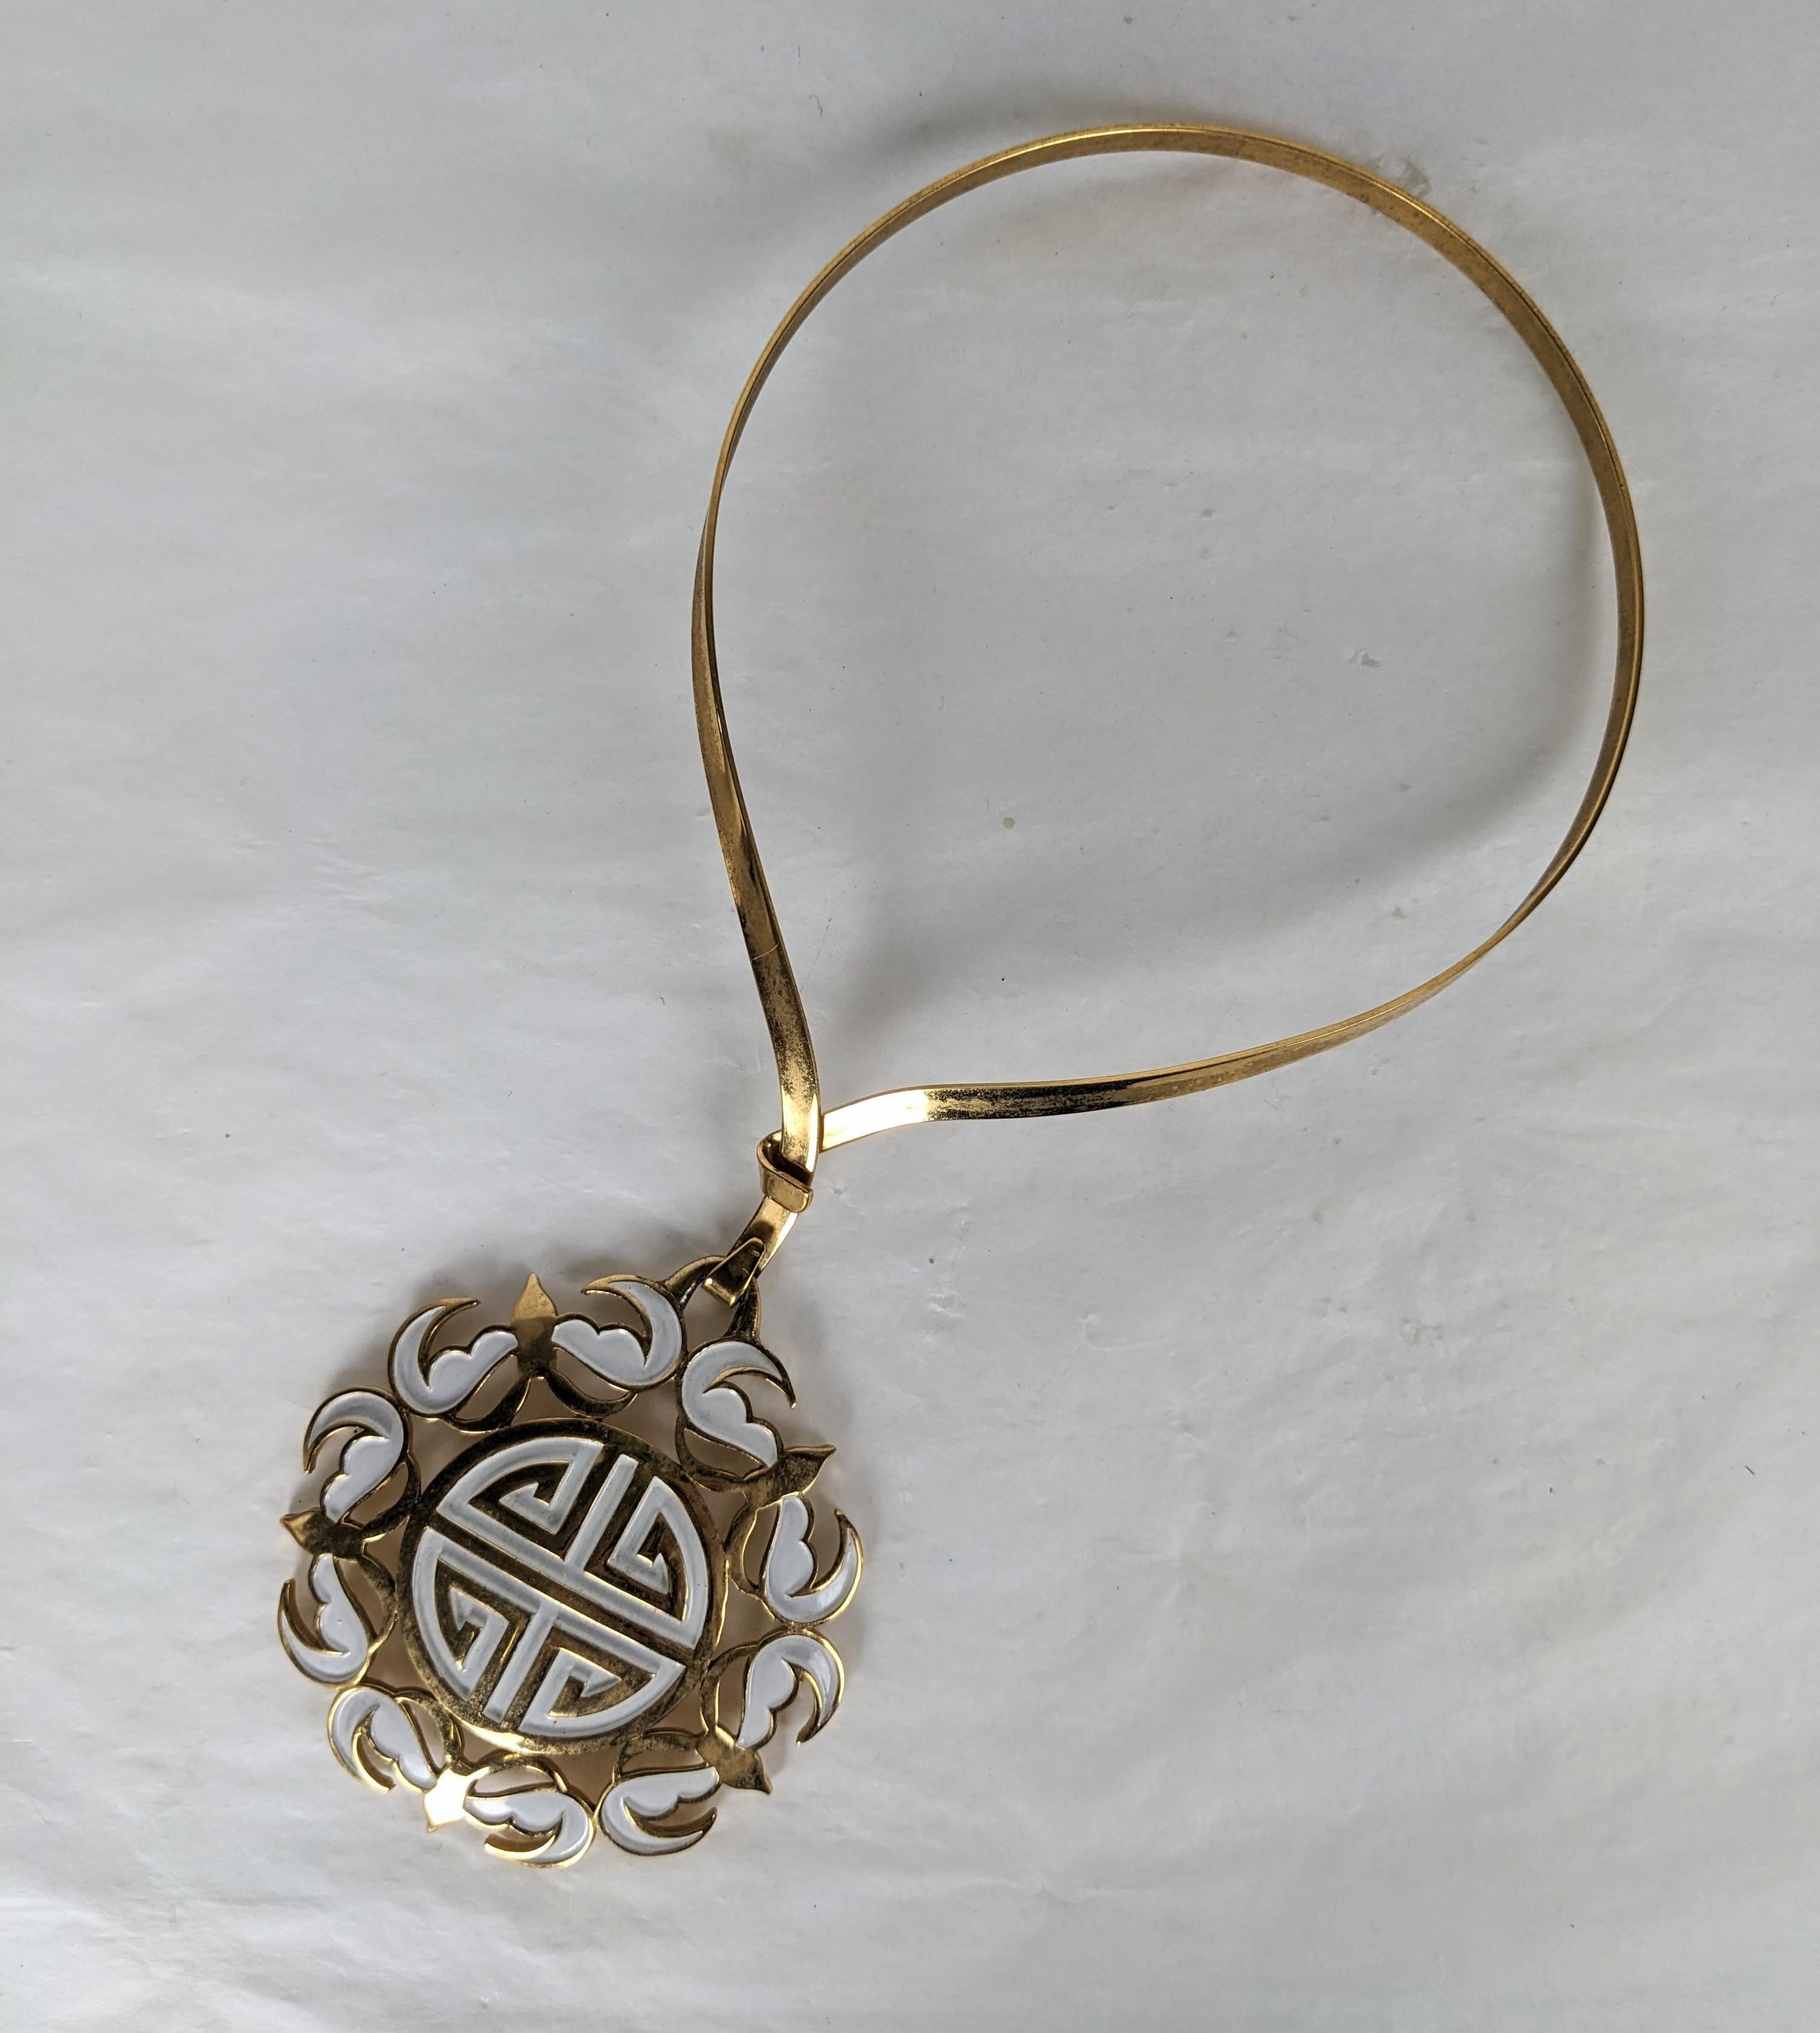 Trifari Chinese Symbol Mod Pendant from the 1960's. Hard collar with gold toned prosperity pendant with white enamel bats surround. Signed Trifari. Diameter 4